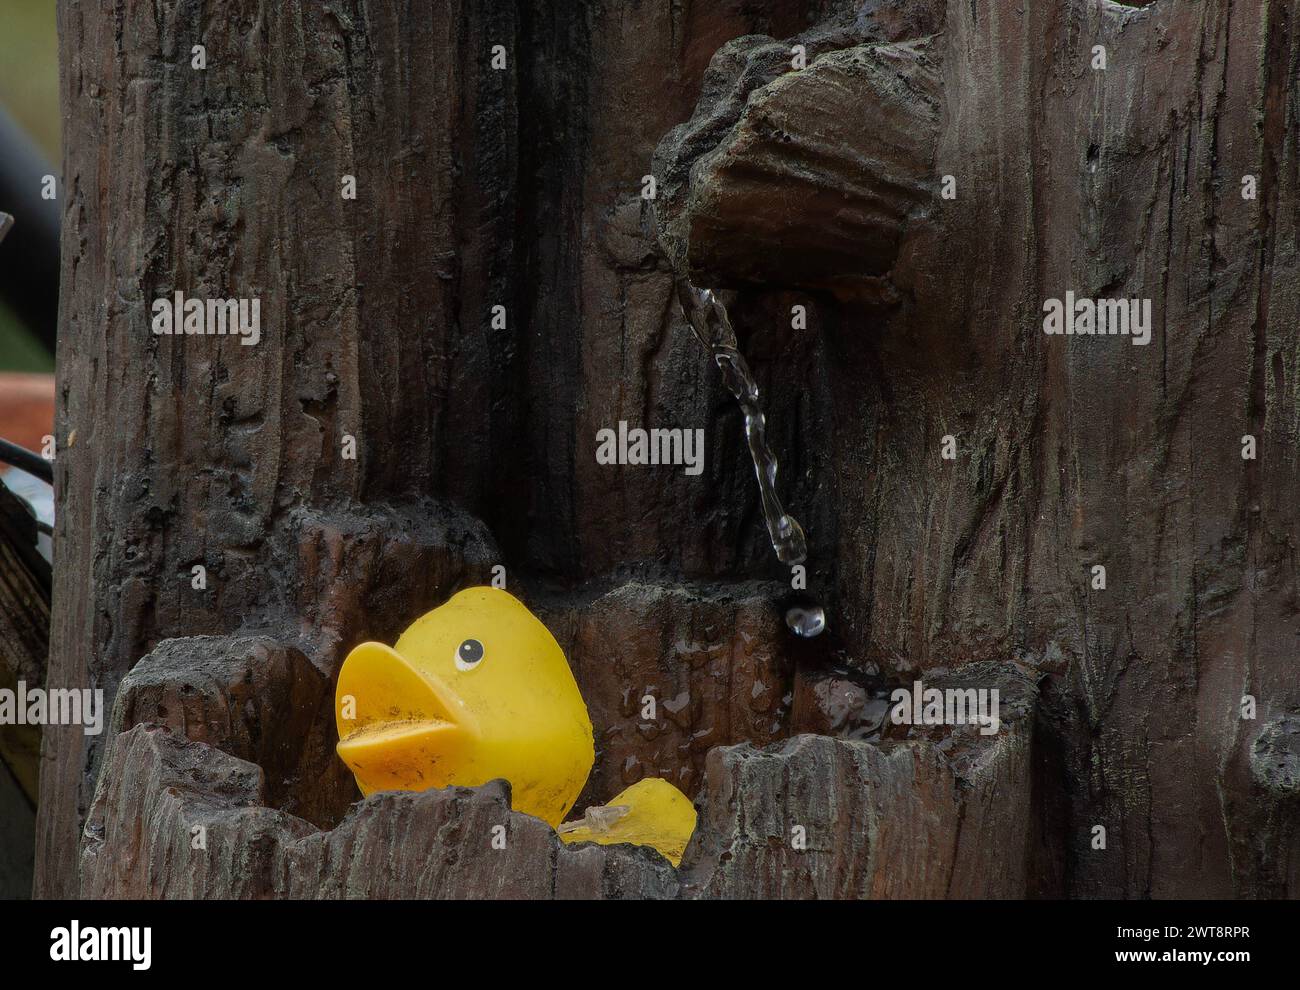 Rubber Duckie on a garden water fountain Stock Photo